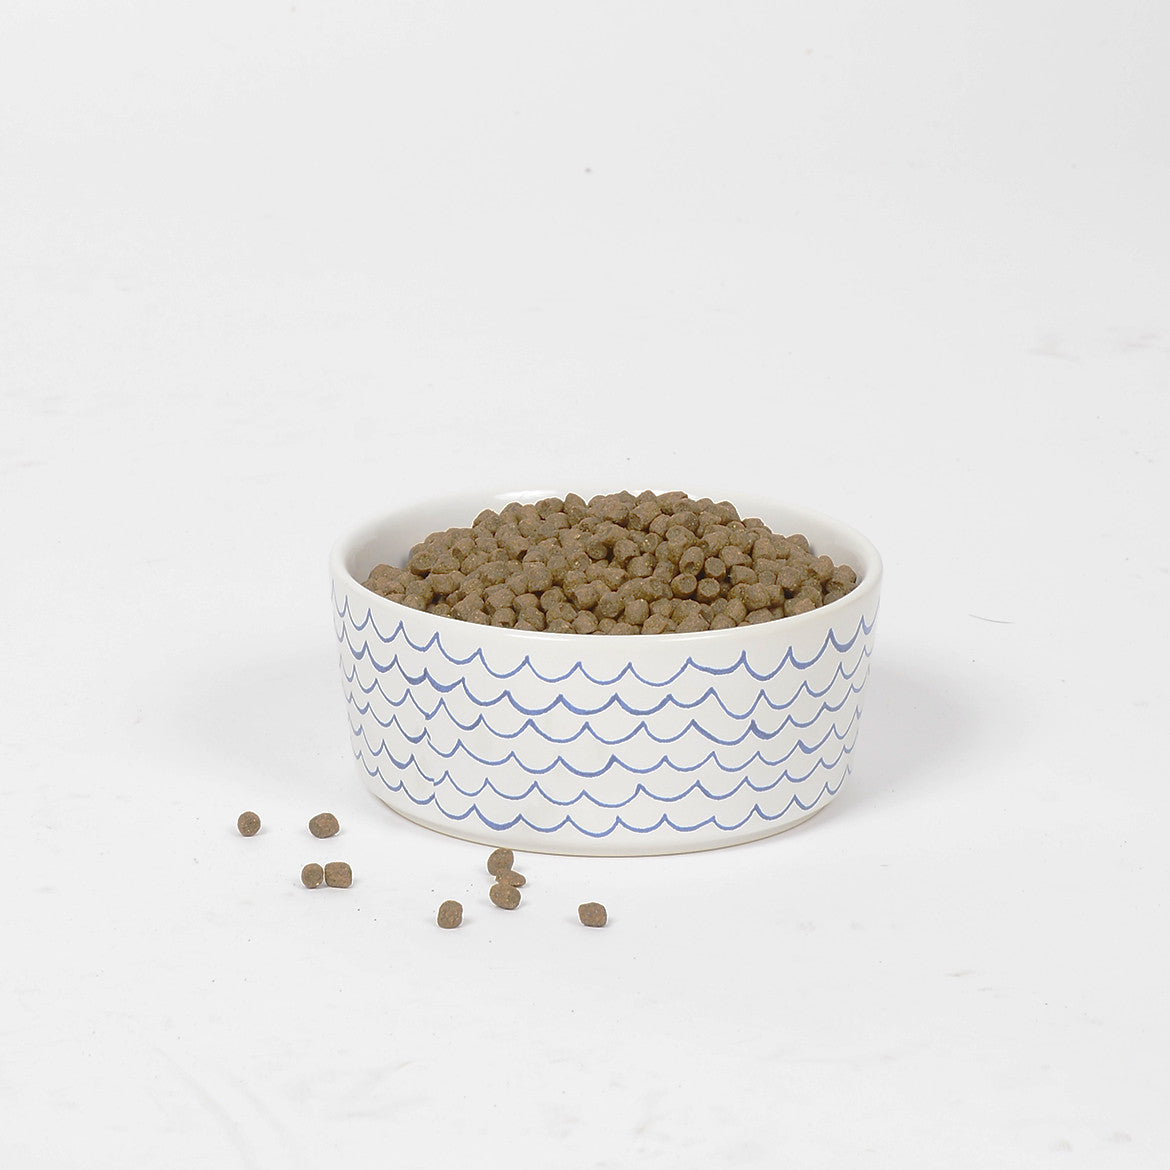 Sketched Wave Ceramic Dog Bowl by Waggo full of food